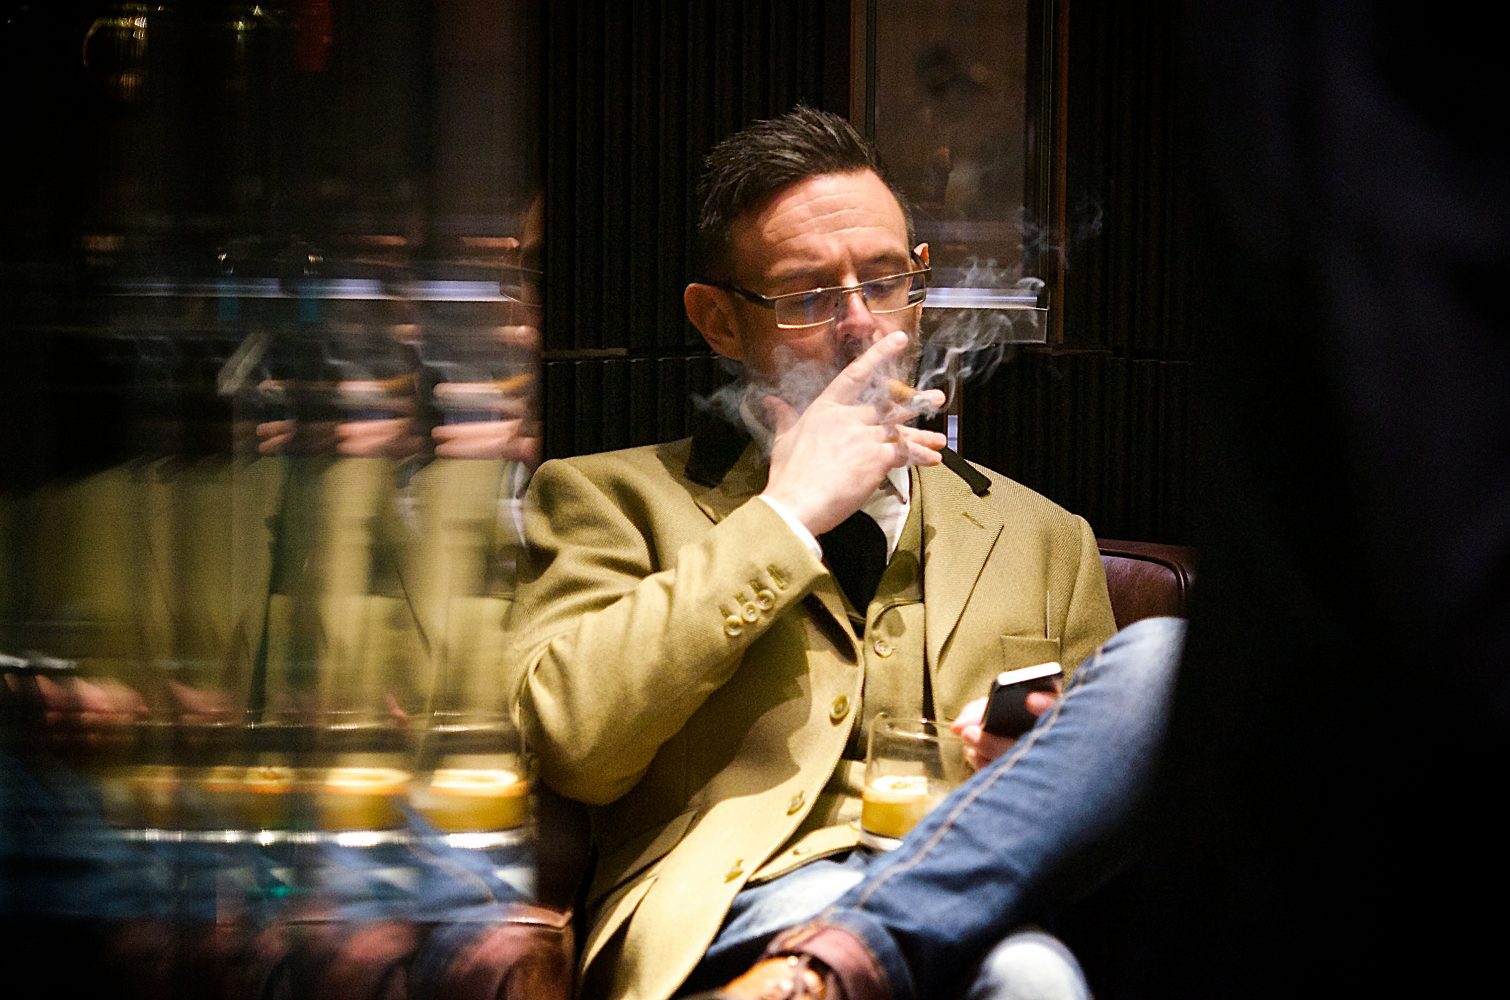 Customer smoking cigar, Dunhill 1A St James's, Retail and Hospitality Experience Design by Household.